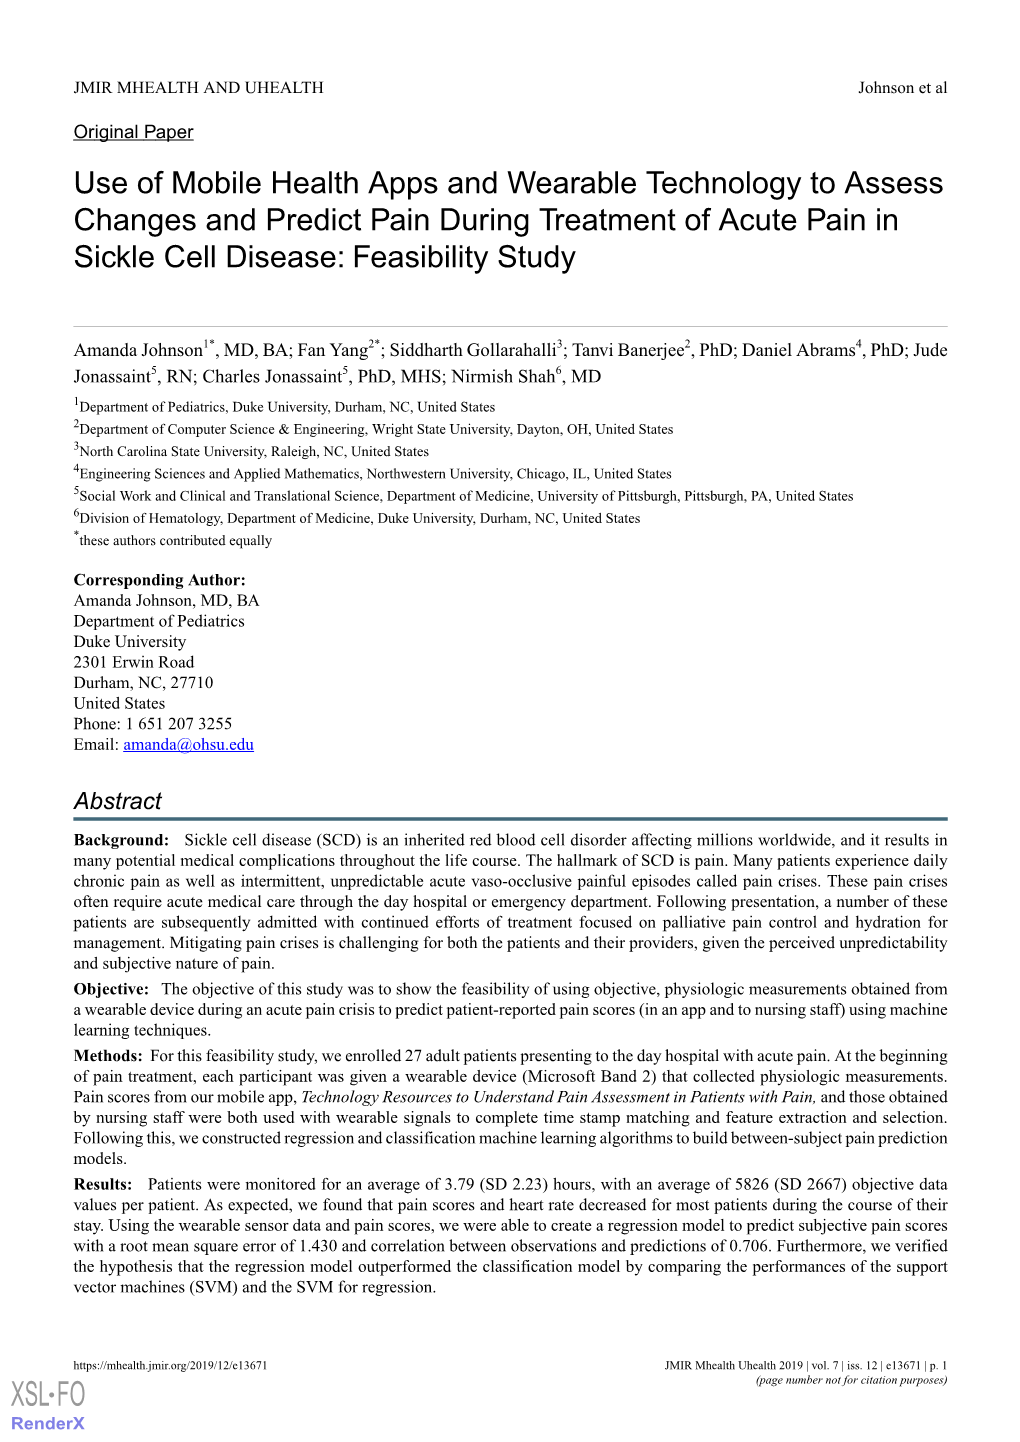 Use of Mobile Health Apps and Wearable Technology to Assess Changes and Predict Pain During Treatment of Acute Pain in Sickle Cell Disease: Feasibility Study